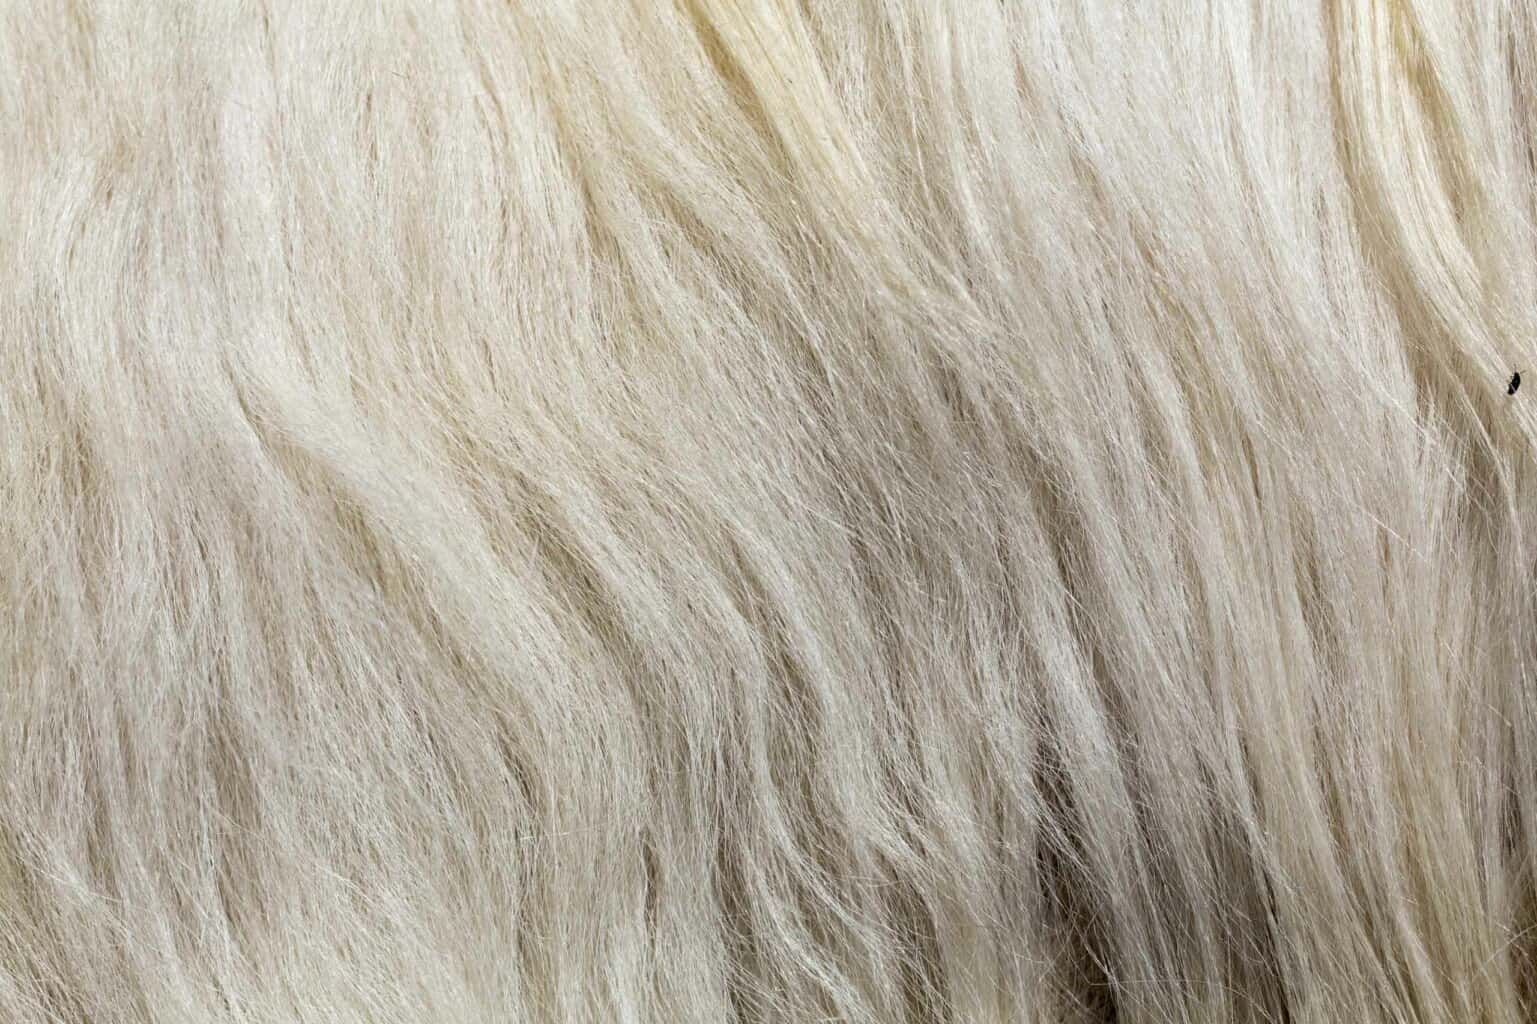 A close up view of wool.